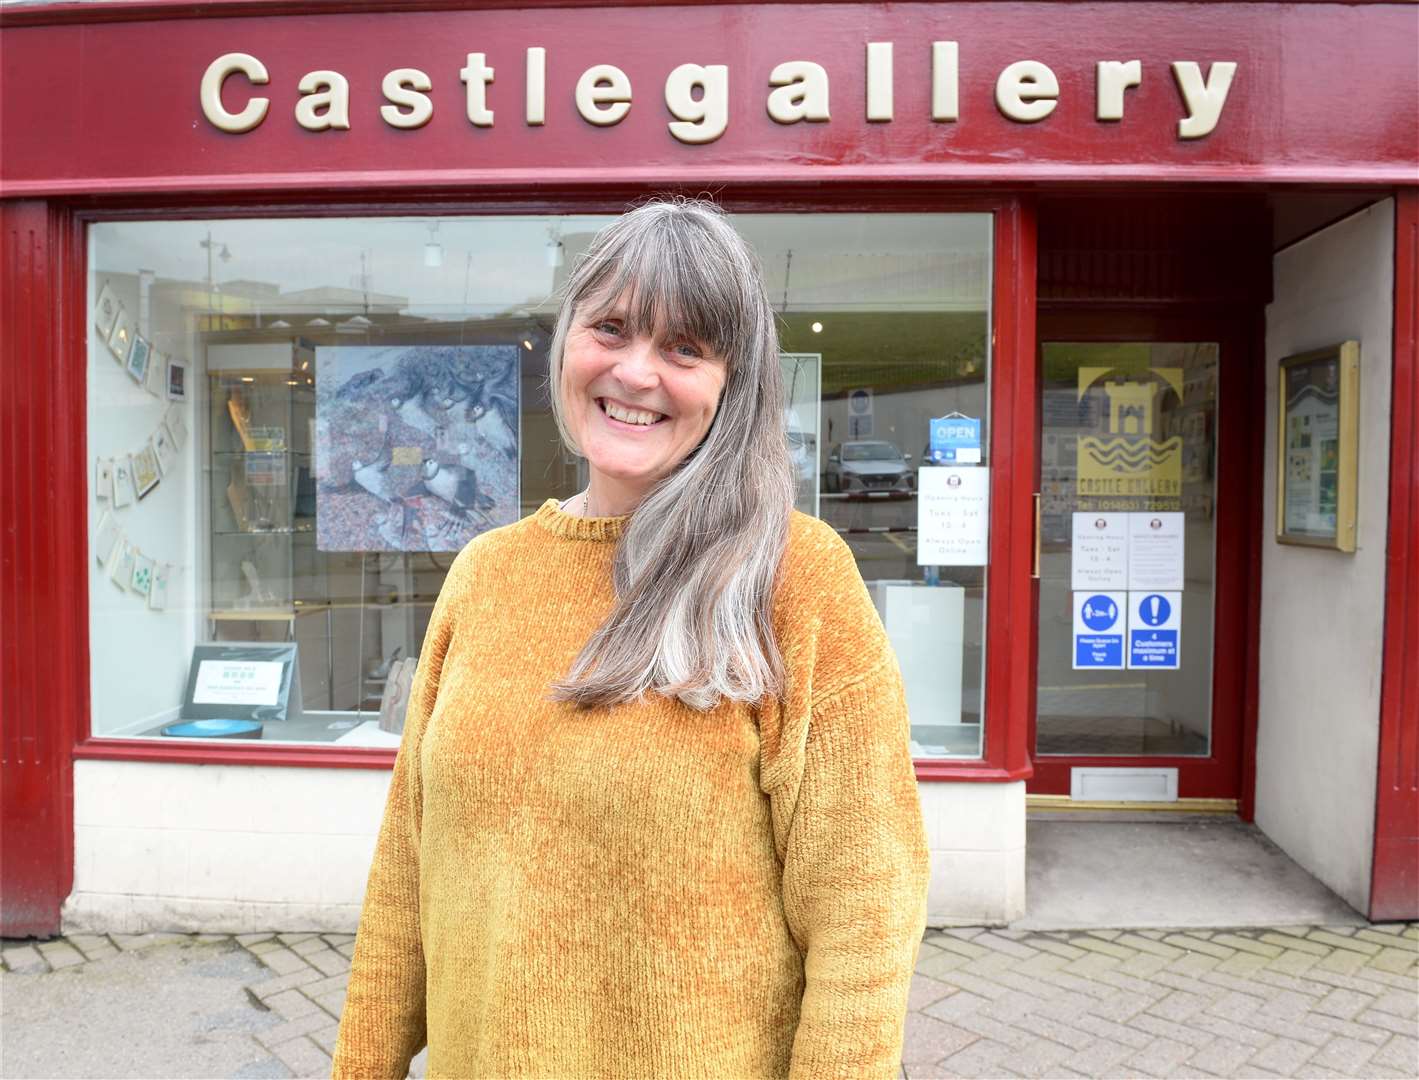 Denise Collins is delighted to have been able to reopen the Castle Gallery.